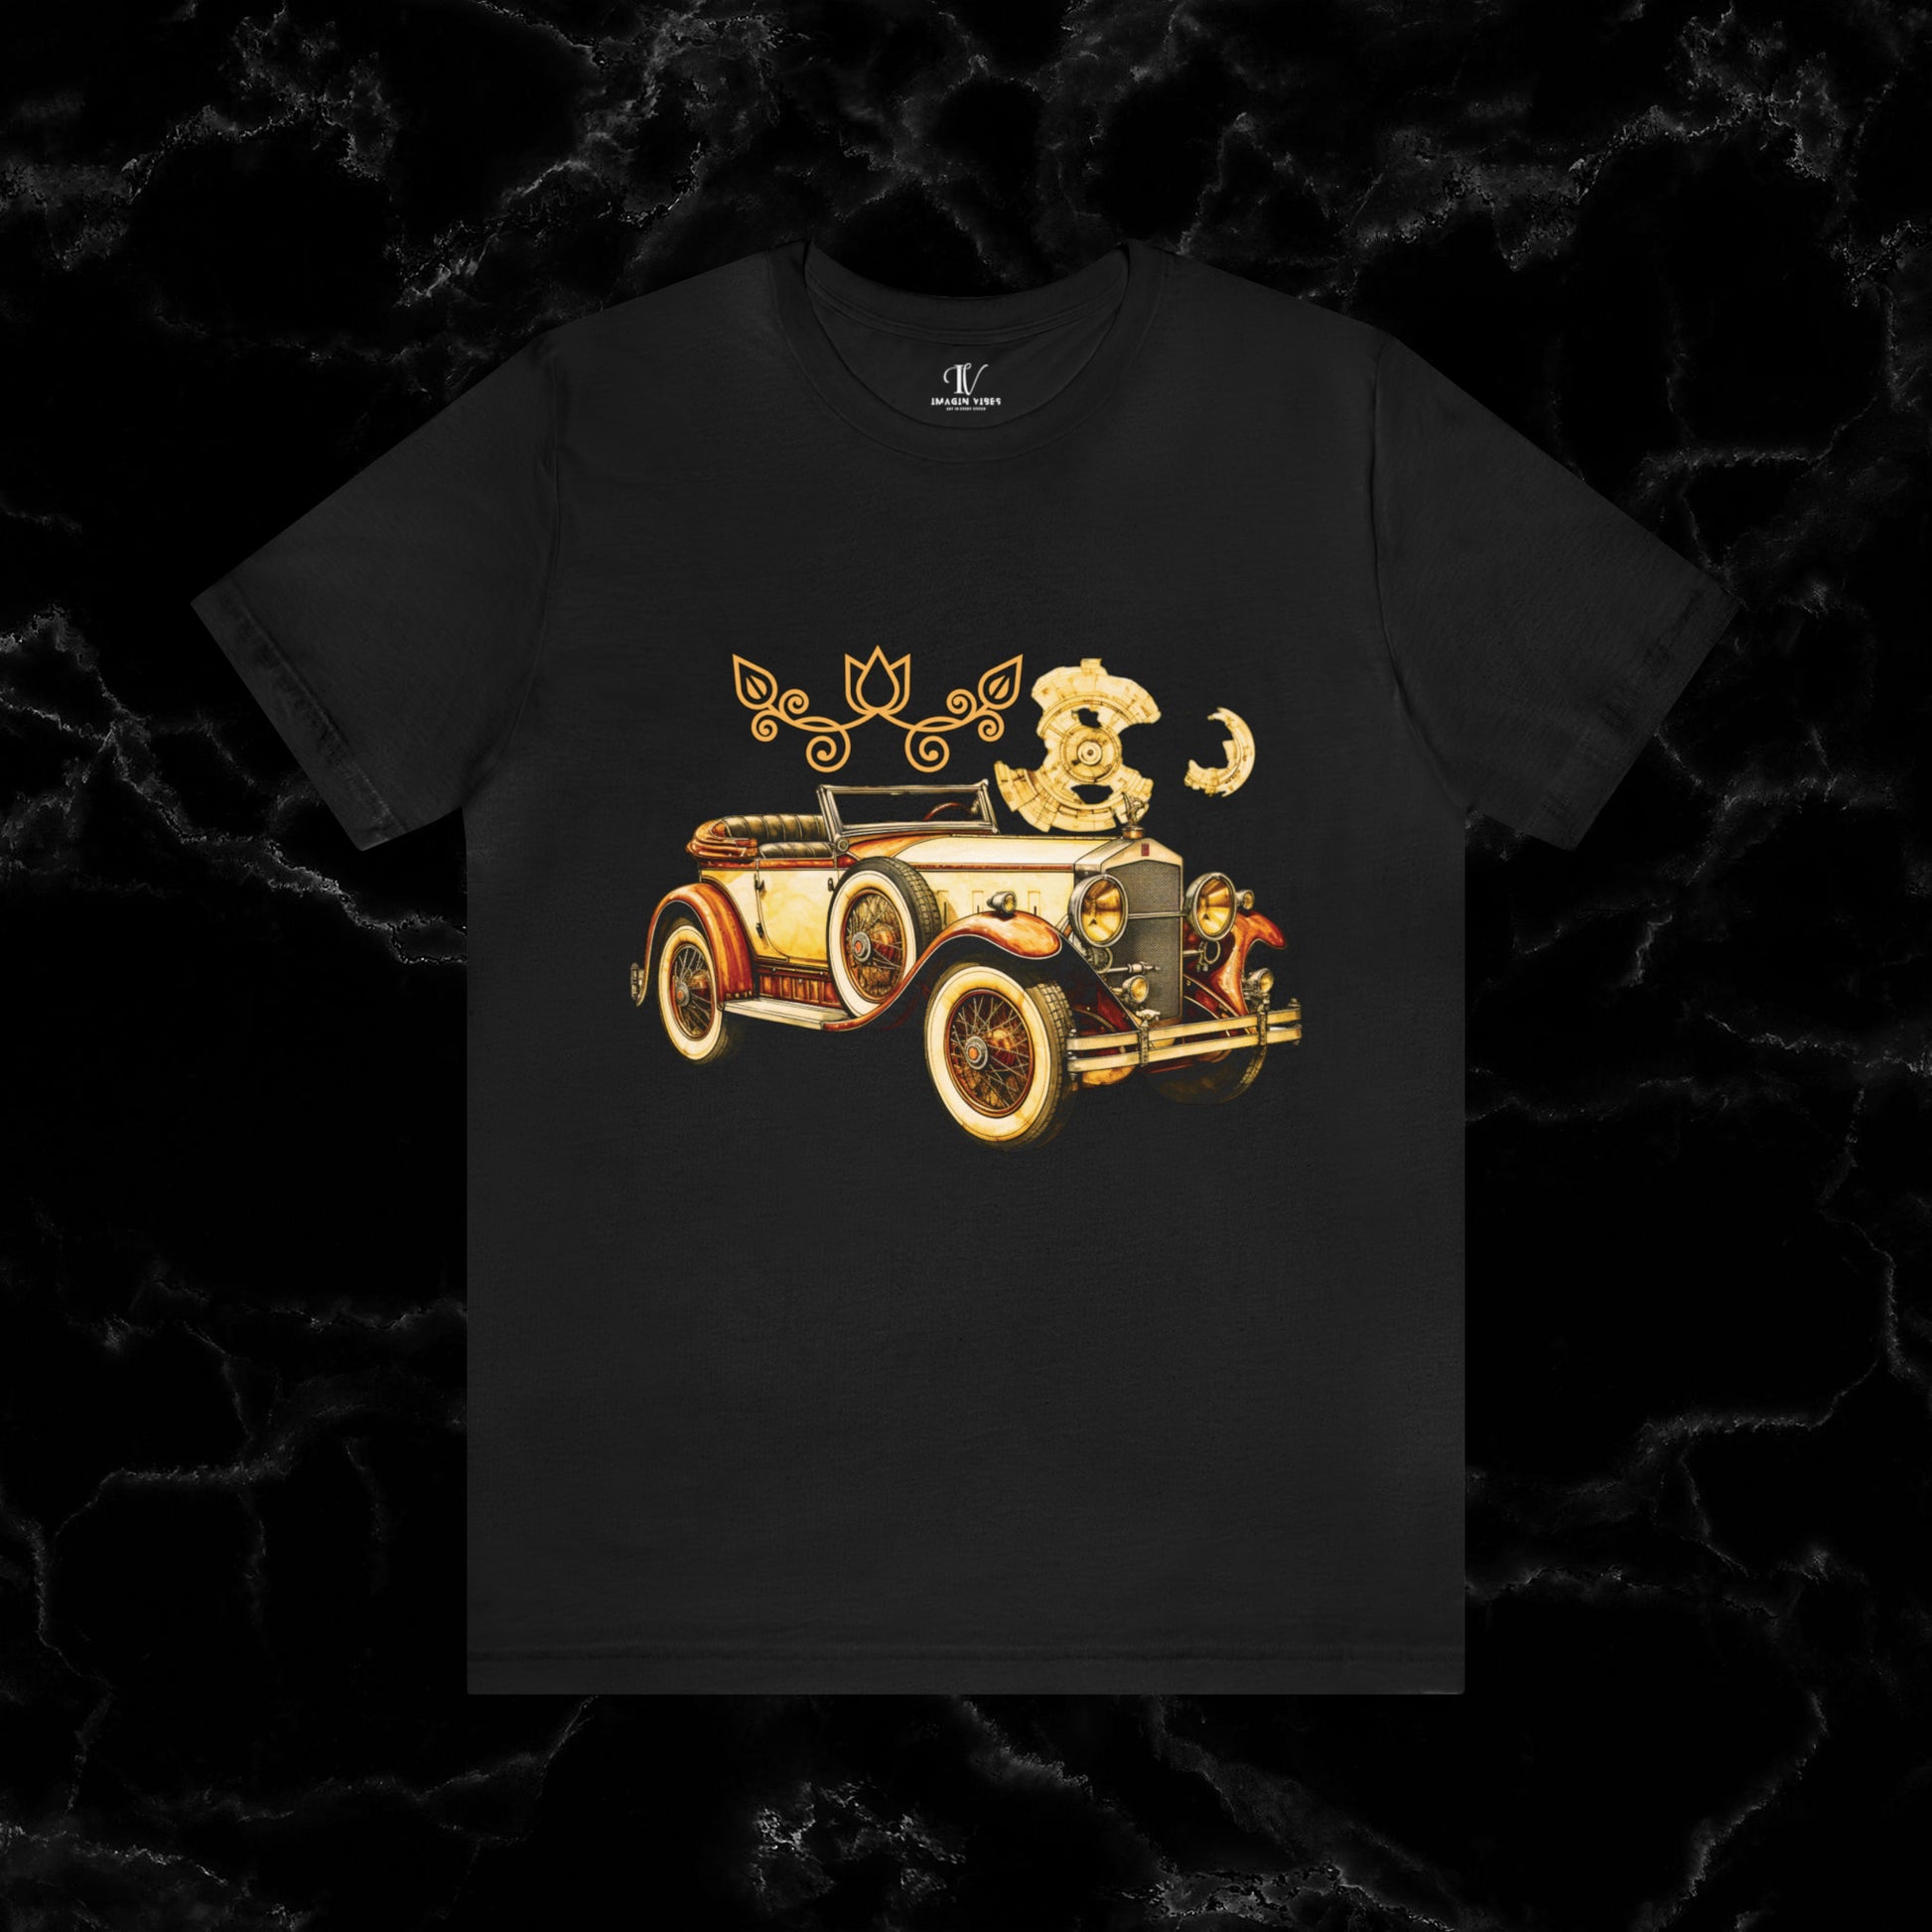 Vintage Car Enthusiast T-Shirt - Classic Wheels and Timeless Appeal for Automotive Enthusiast T-Shirt Black S 